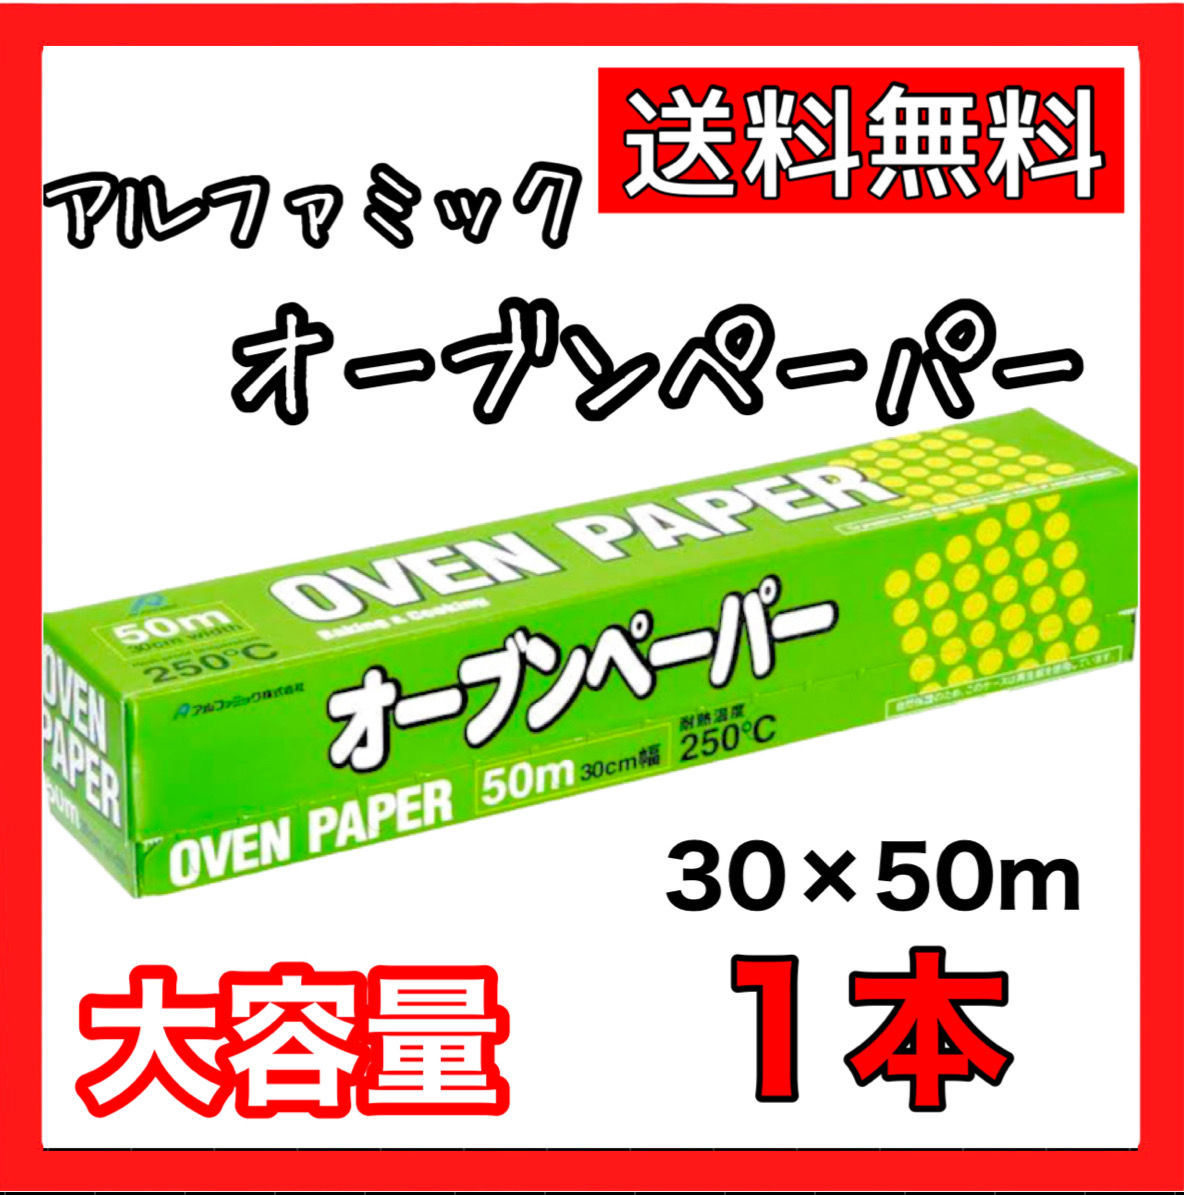  cooking sheet business use oven paper Alpha mik white 30×50m made in Japan 1 pcs small amount . trial cost koCOSTCO